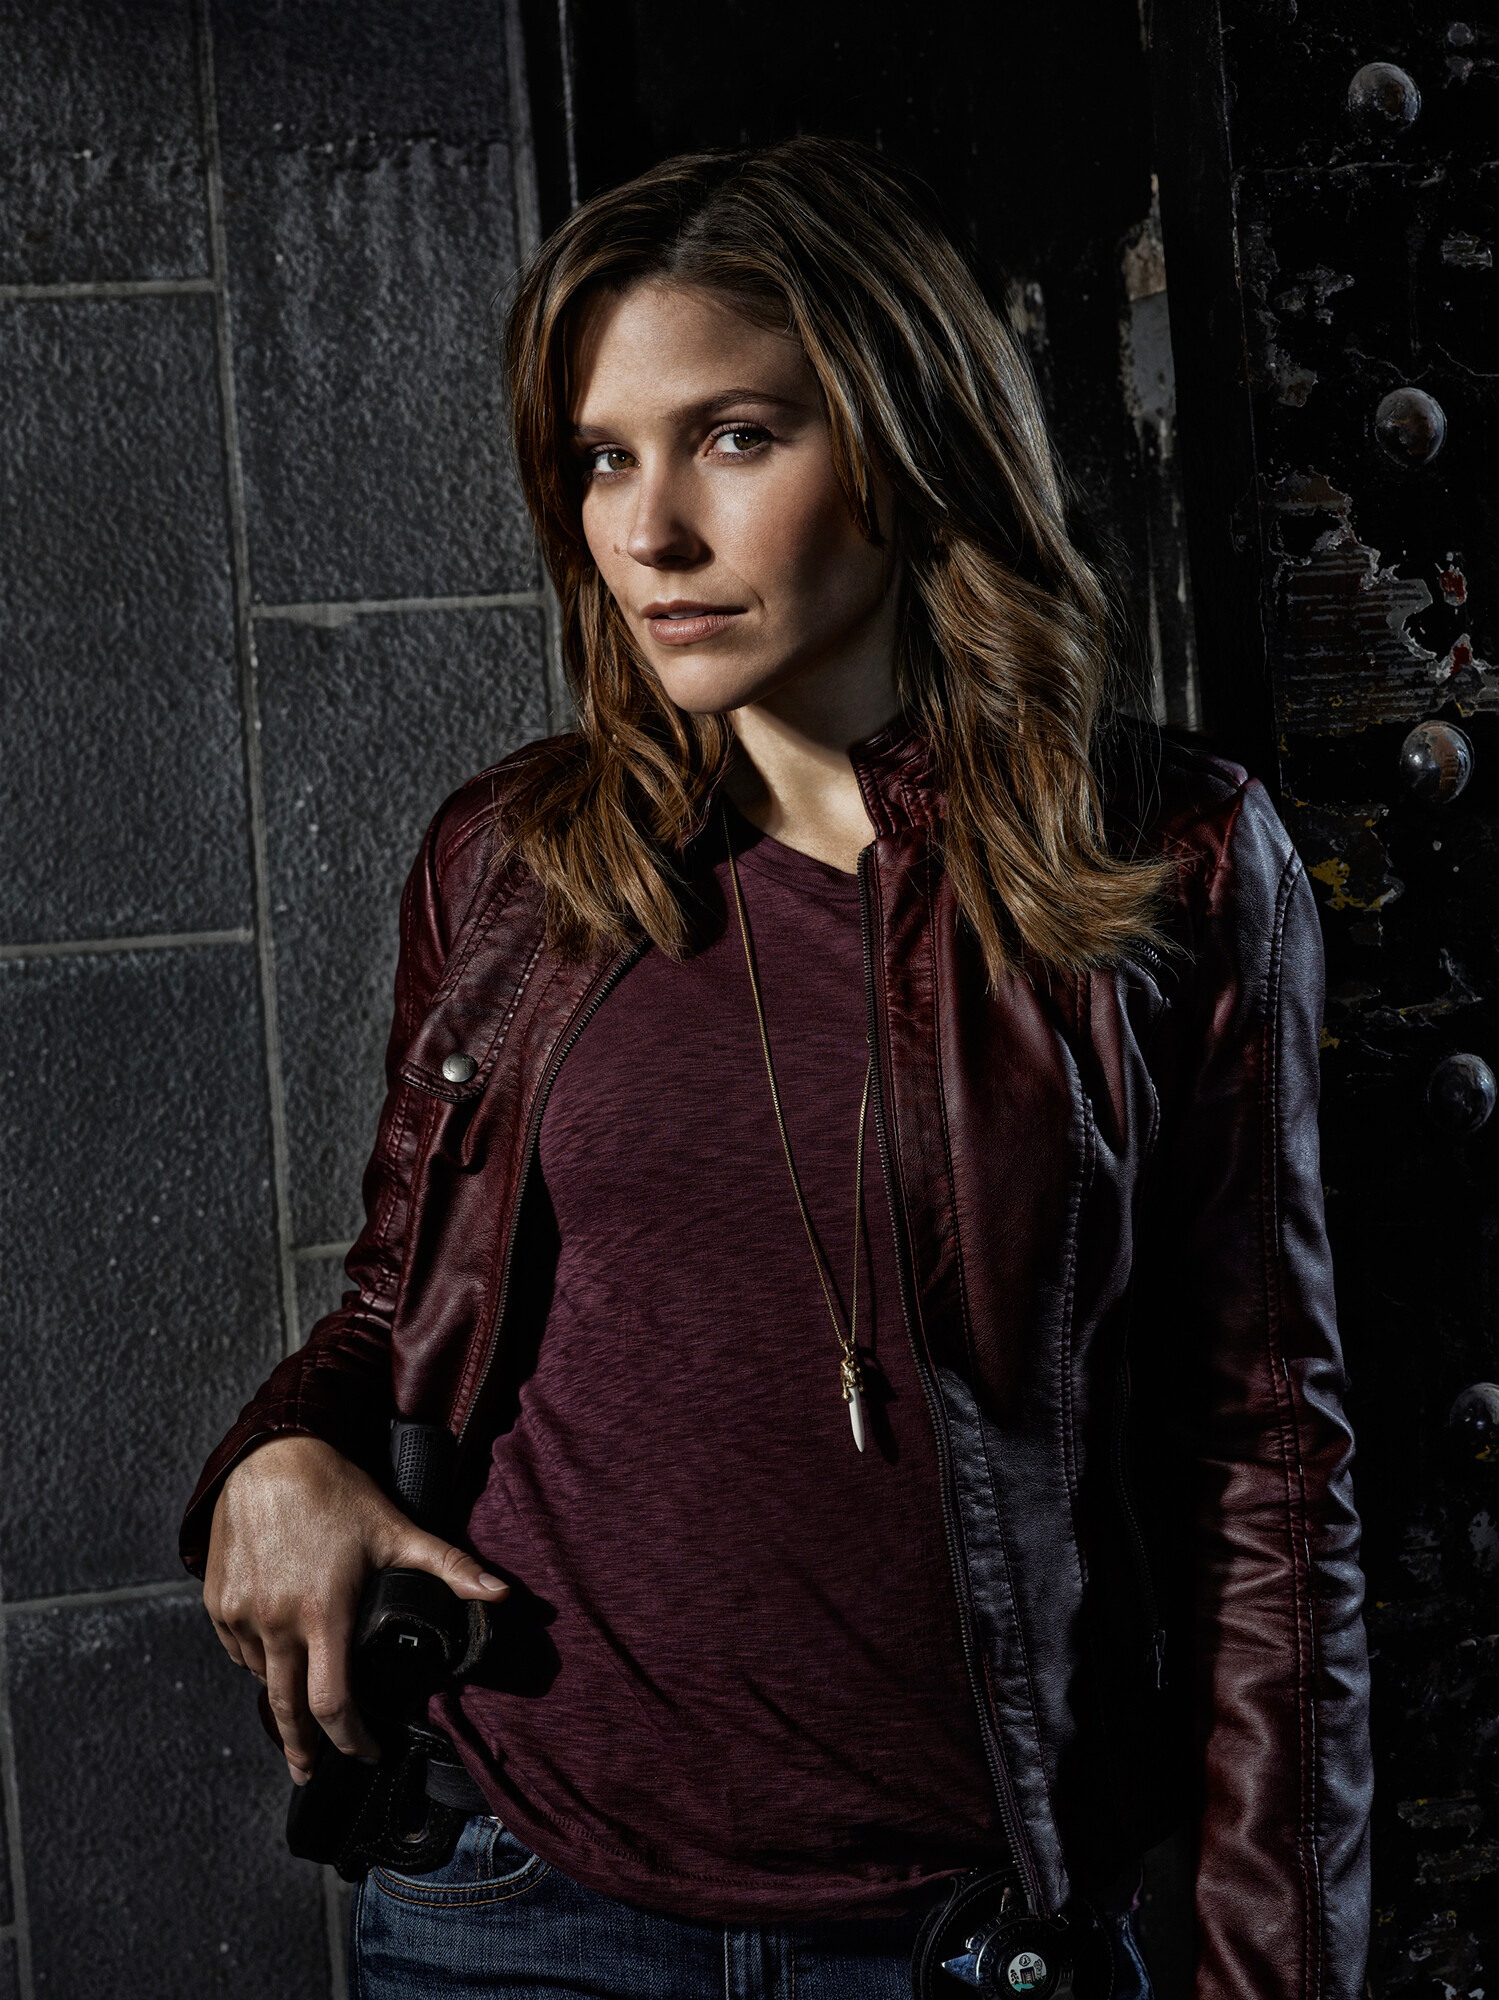 Chicago P.D. (TV Series): Sophia Anna Bush Hughes, An American Actress, Well-Known For Her Role As Brooke Davis In The WB/CW Drama Series "One Tree Hill". 1500x2000 HD Background.